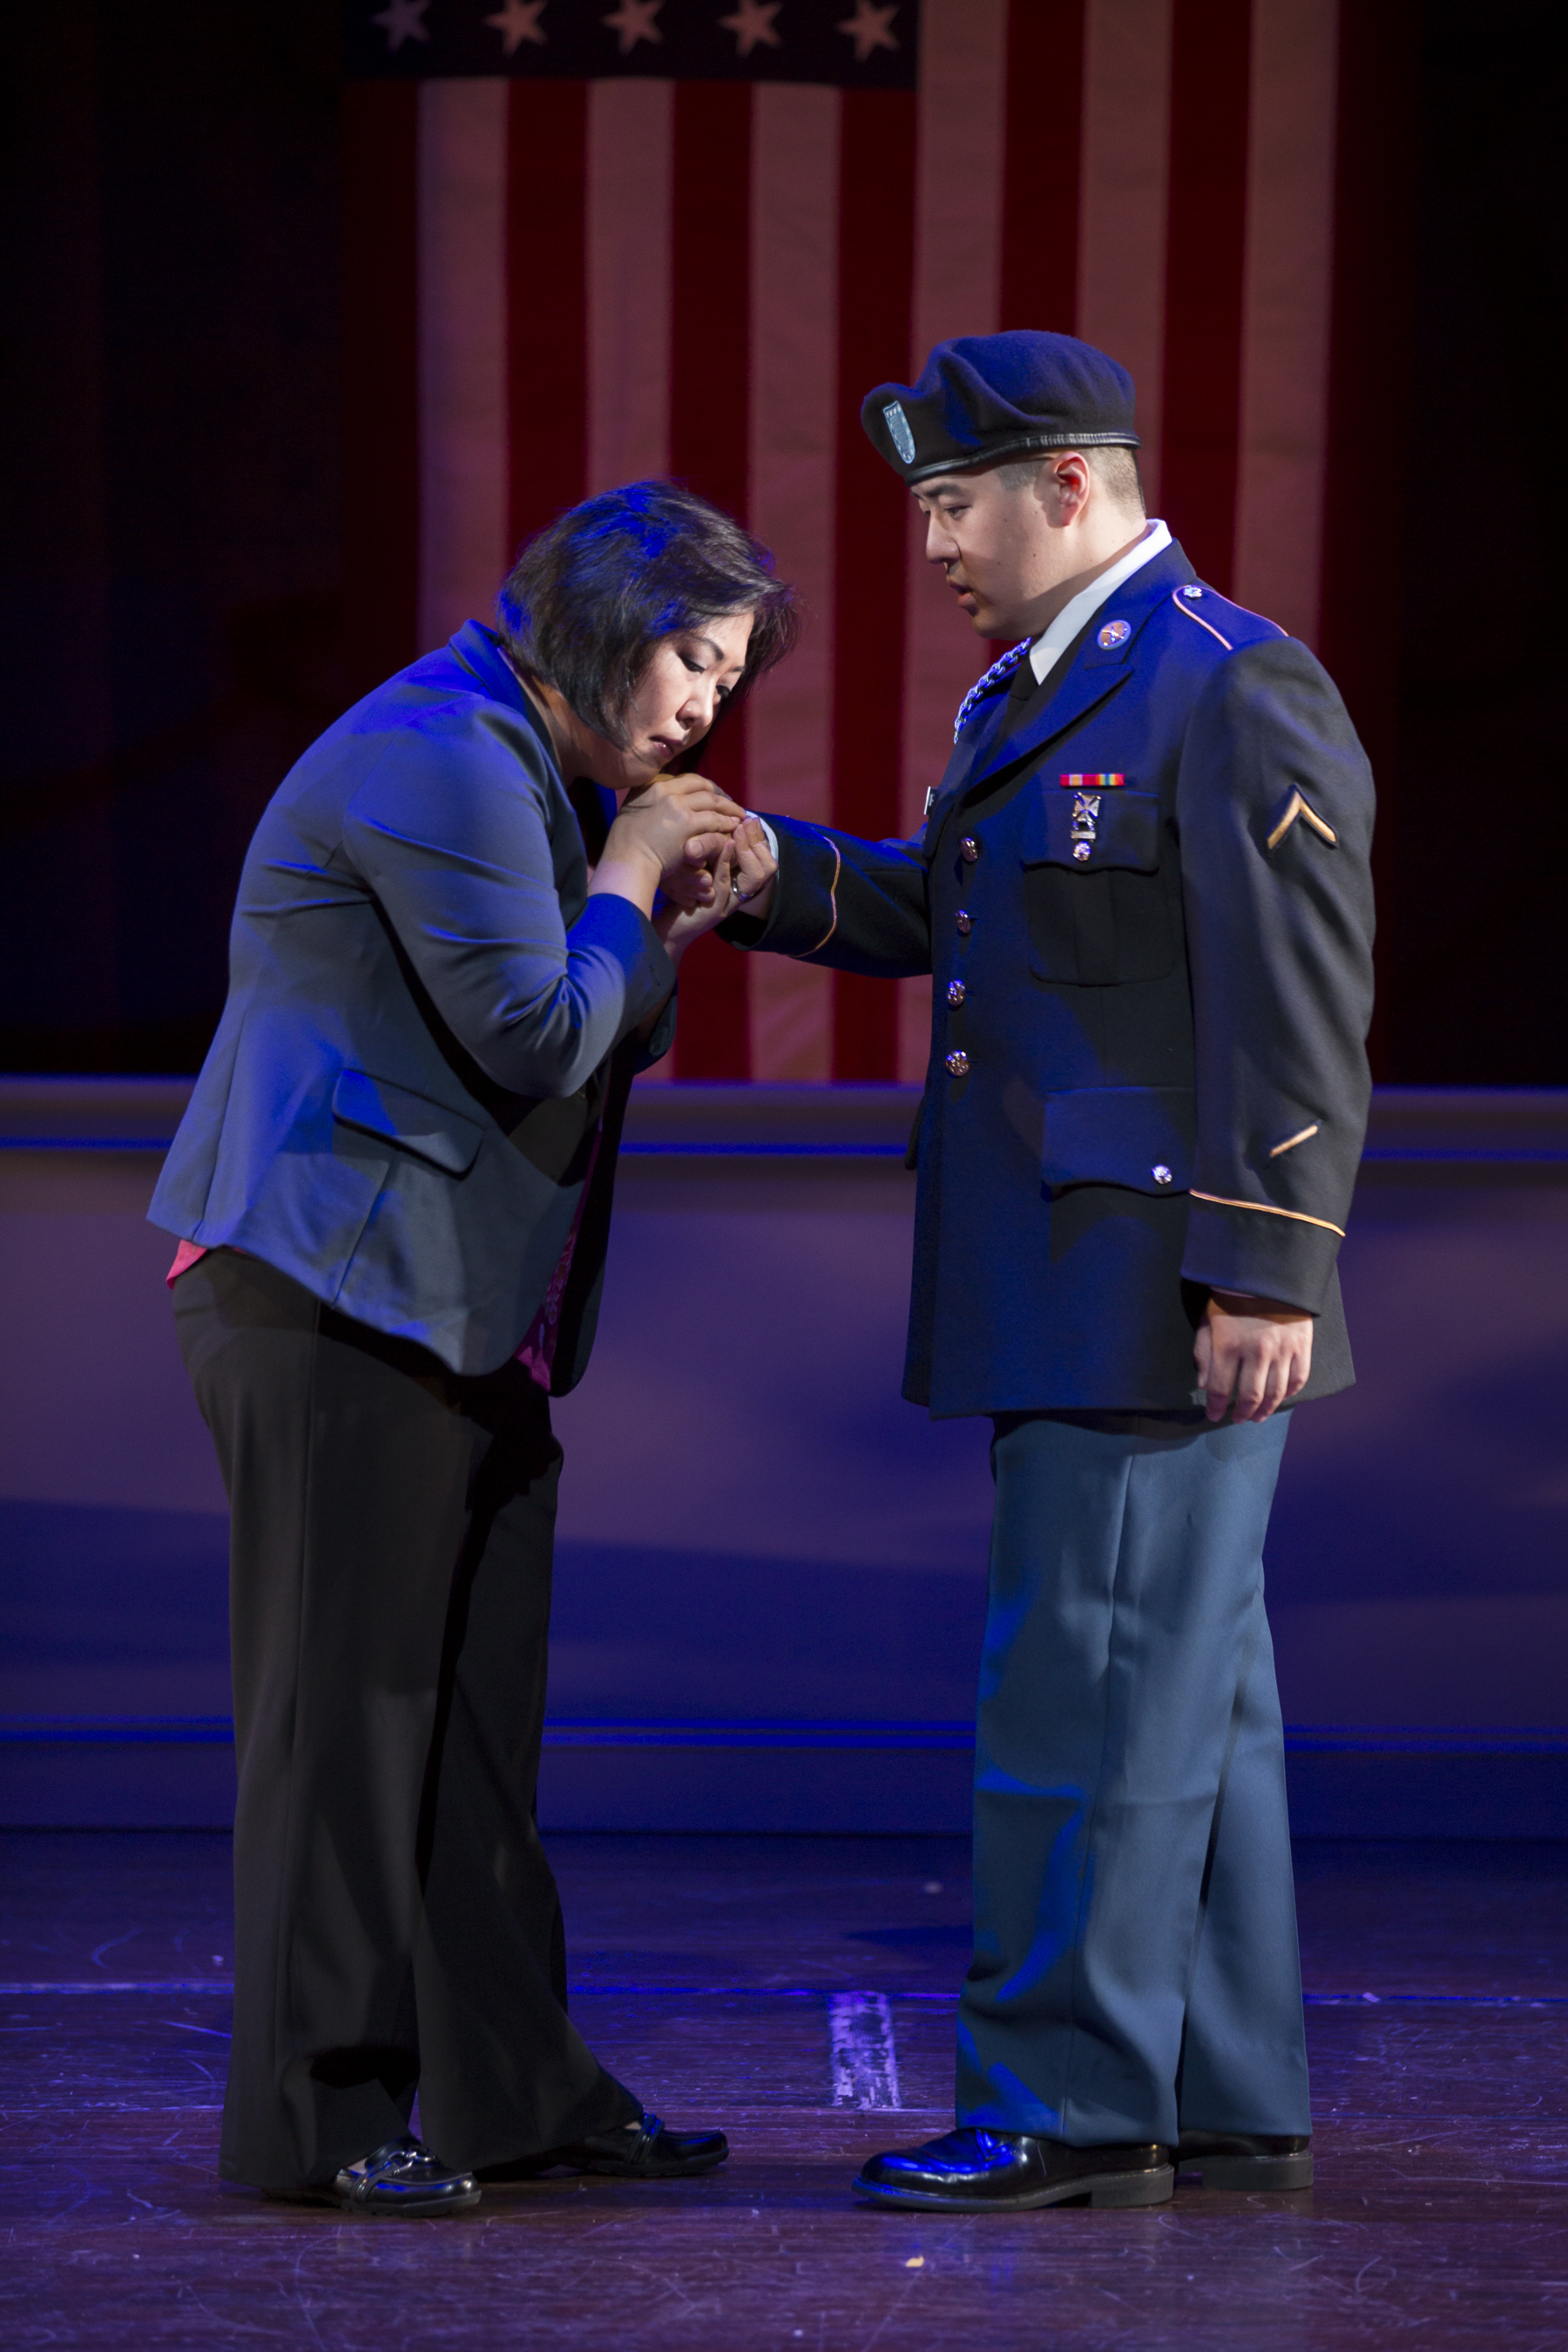 Guang Yang as Mother Chen and Andrew Stenson as Danny Chen. Photo by Scott Suchman for the Washington National Opera, 2015